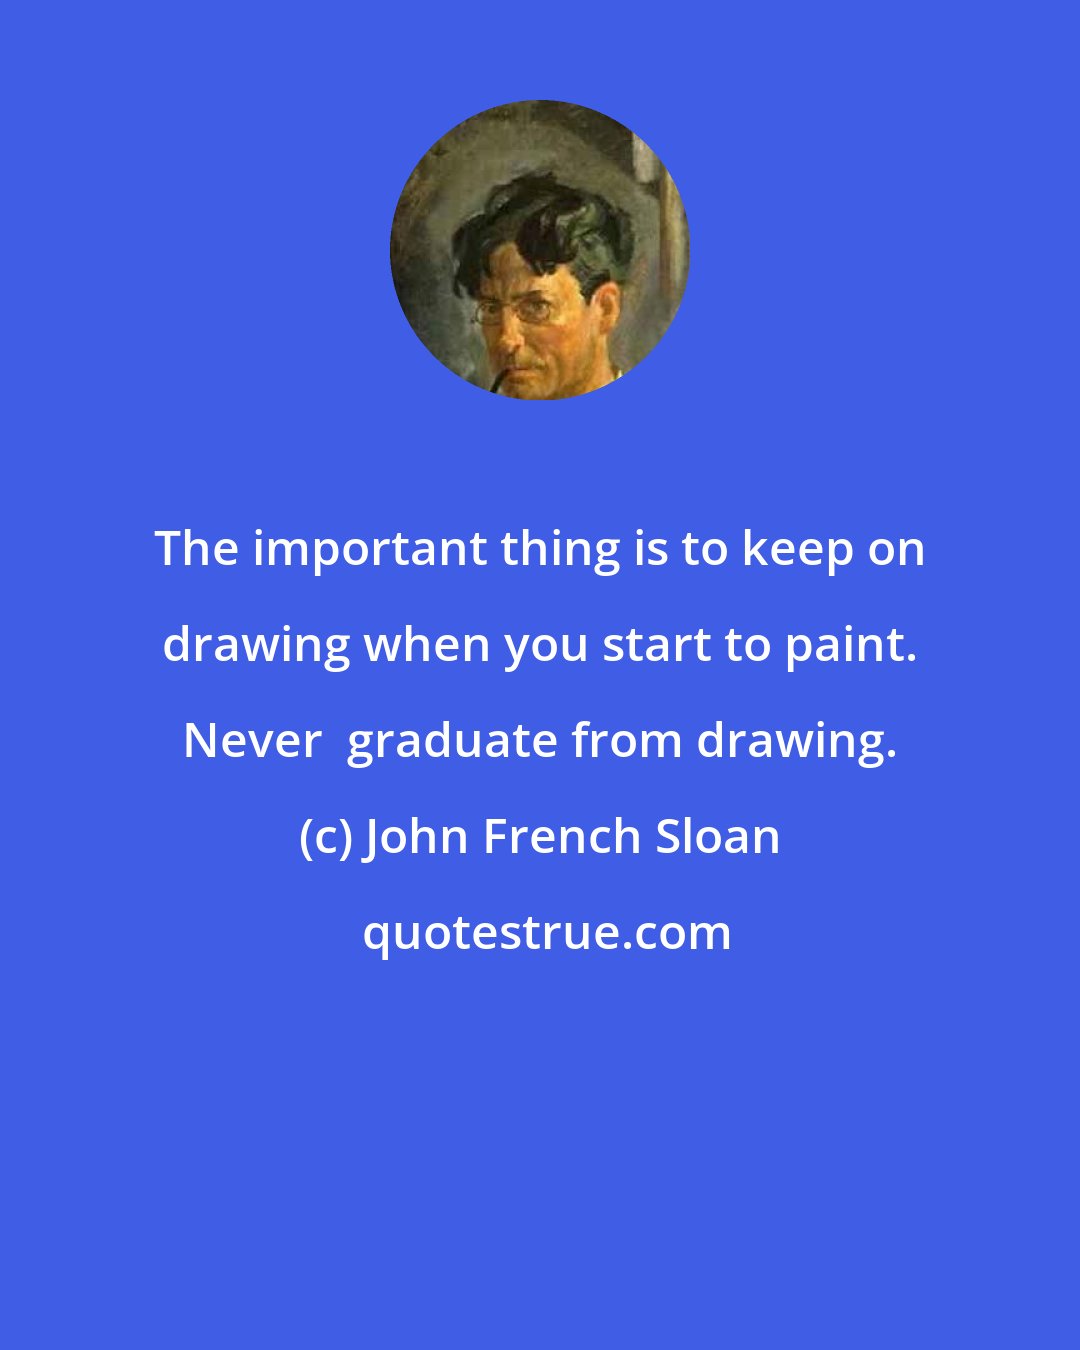 John French Sloan: The important thing is to keep on drawing when you start to paint. Never  graduate from drawing.